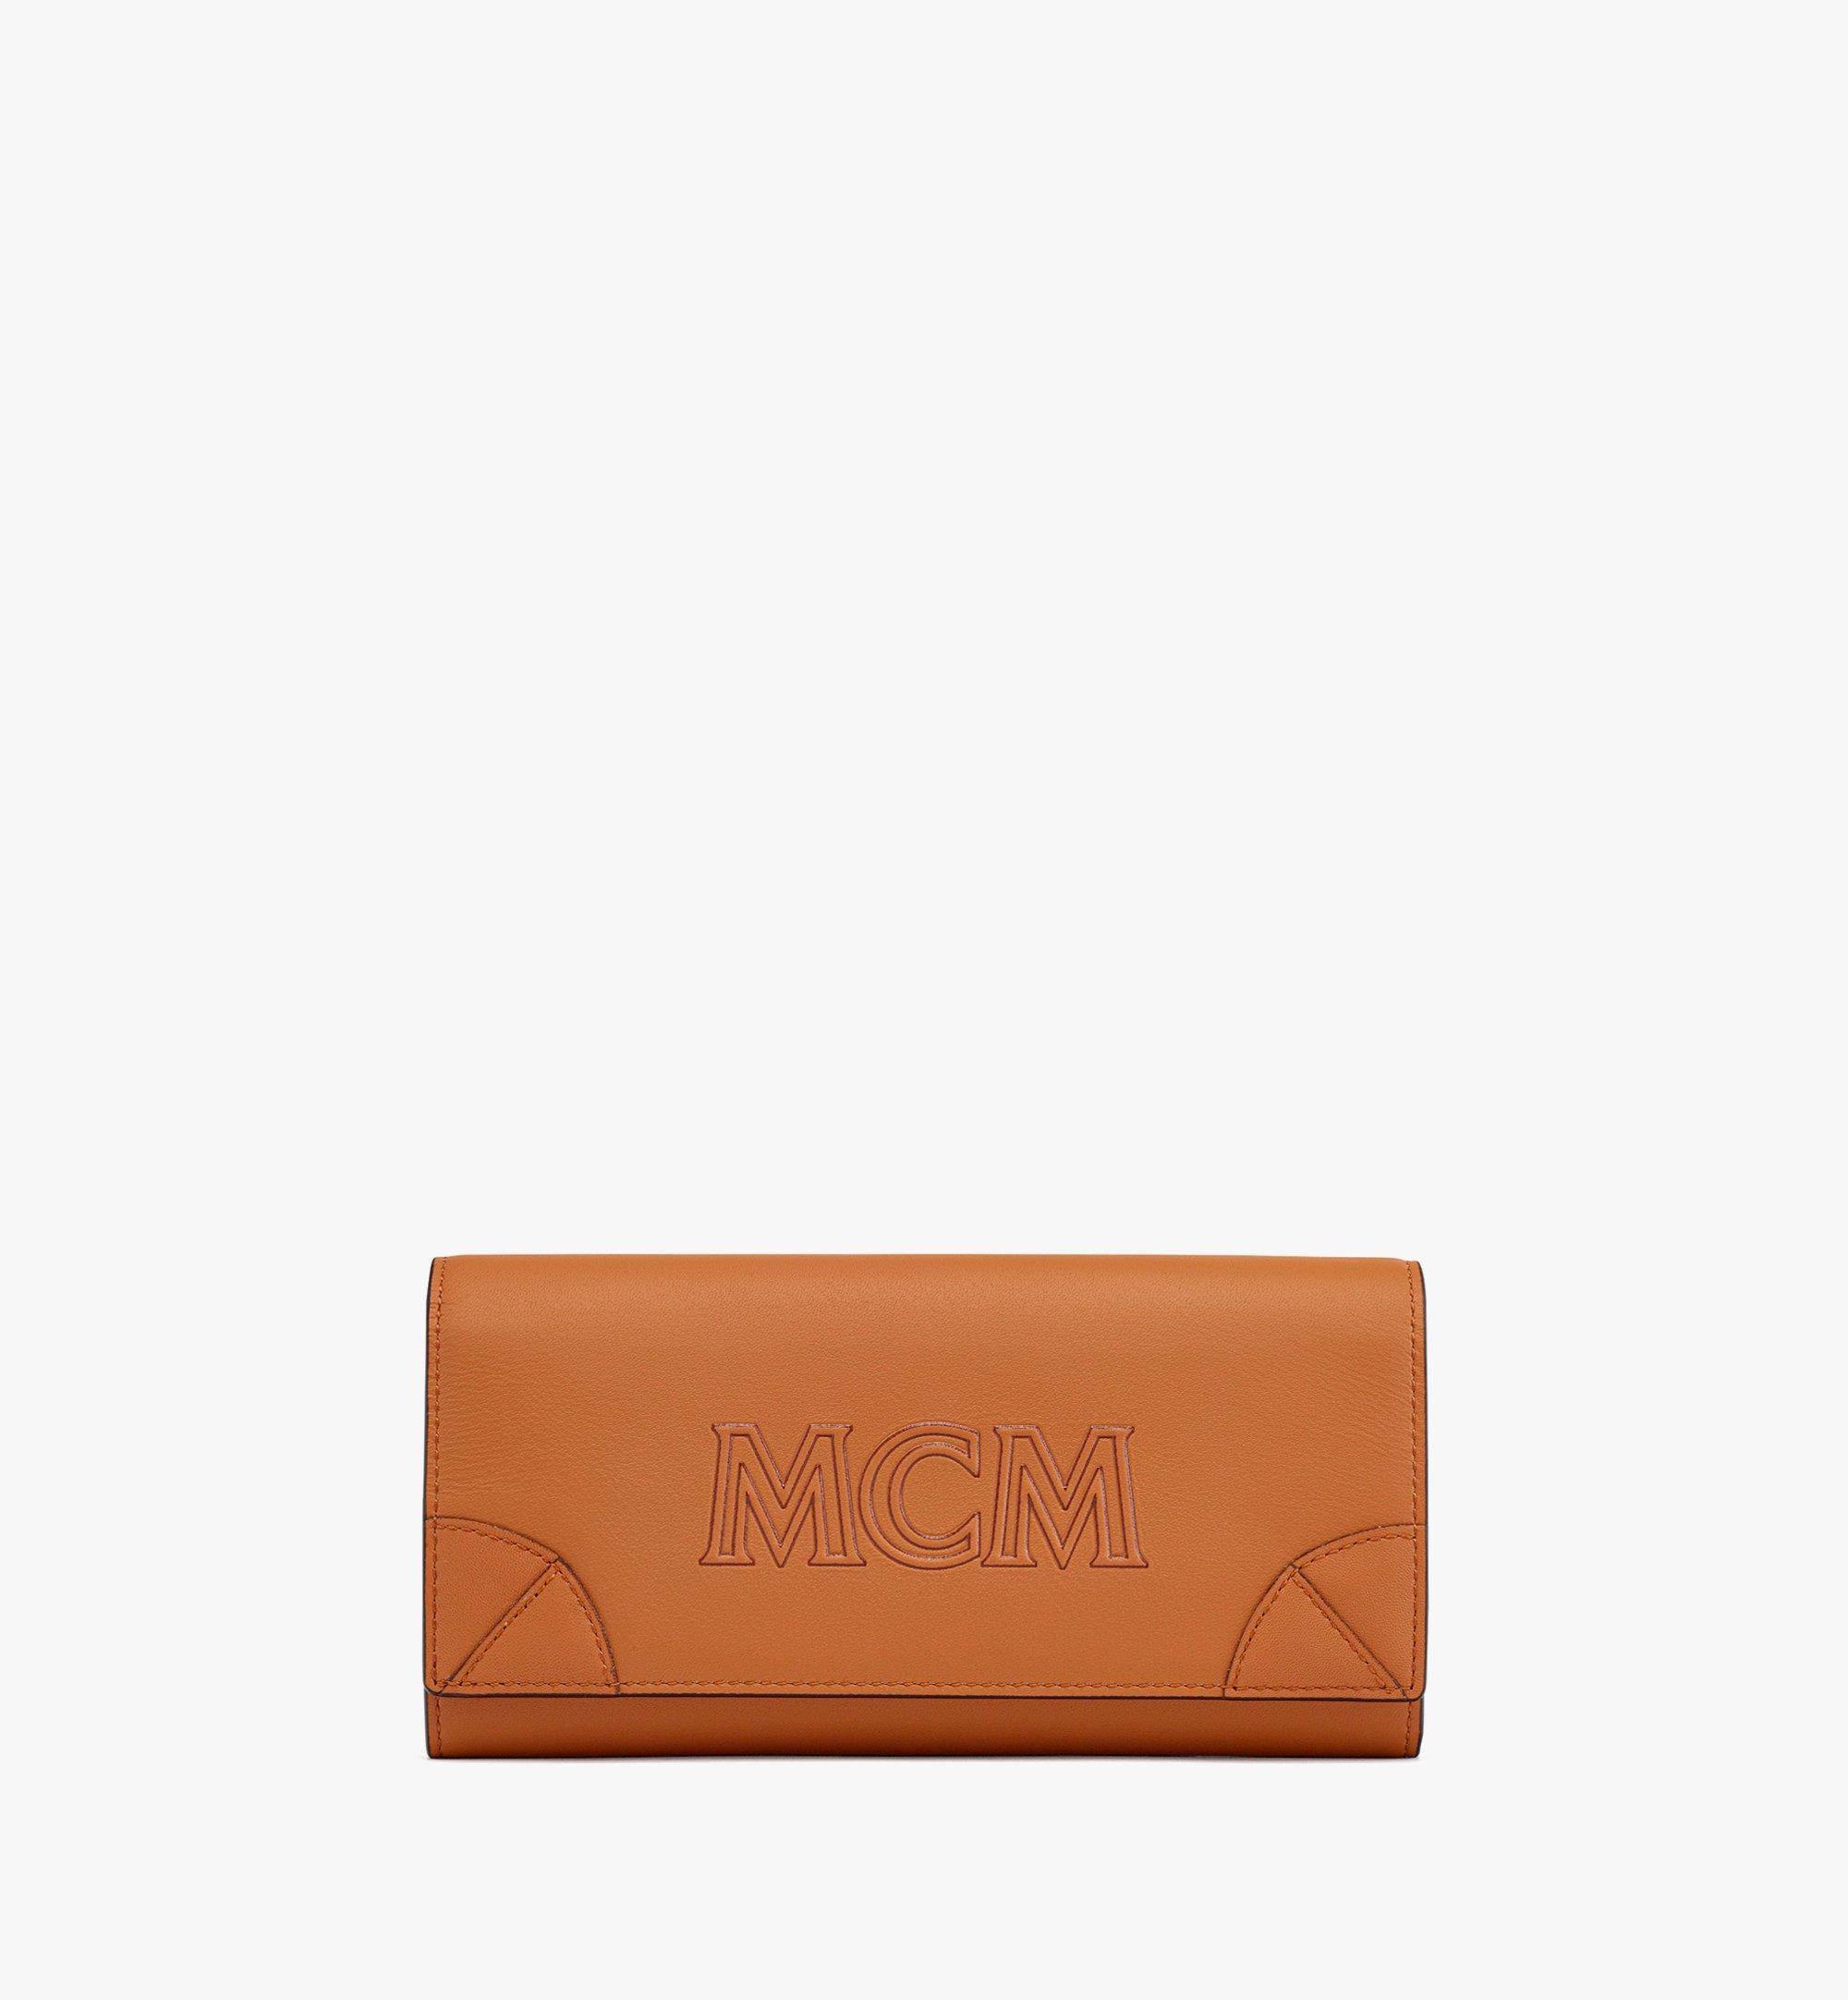 MCM Aren Continental Wallet in Spanish Calf Leather Cognac MYLDATA03CO001 Alternate View 1